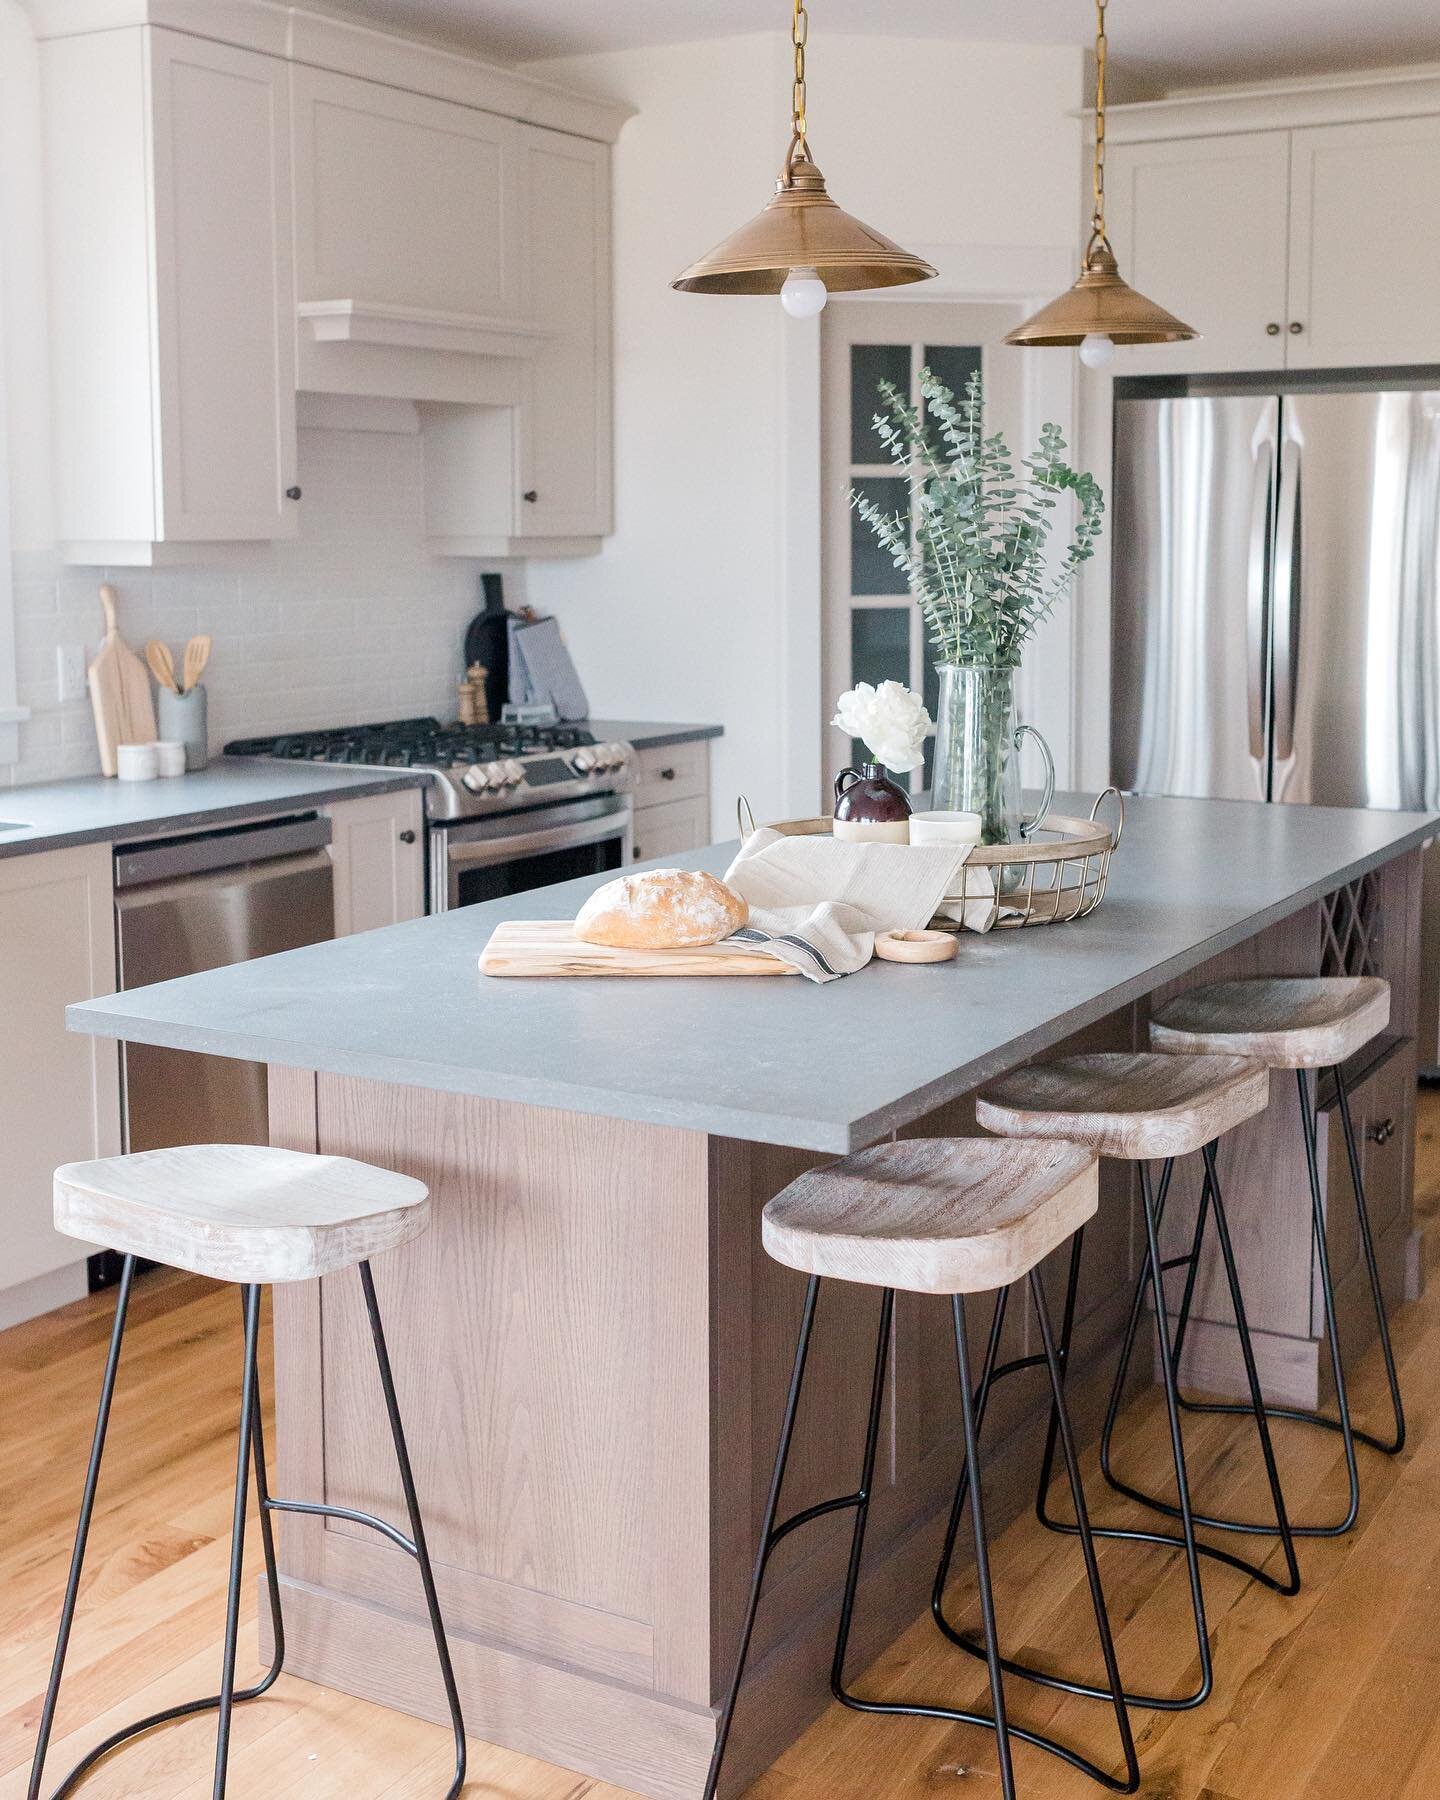 We reached our 3k goal! And that means it&rsquo;s GIVEAWAY time! We will be giving away a $300 GIFT CARD to an Ottawa restaurant of your choosing! You may have a beautiful kitchen to enjoy, like this one in our Lakeside Custom, but once in awhile it&